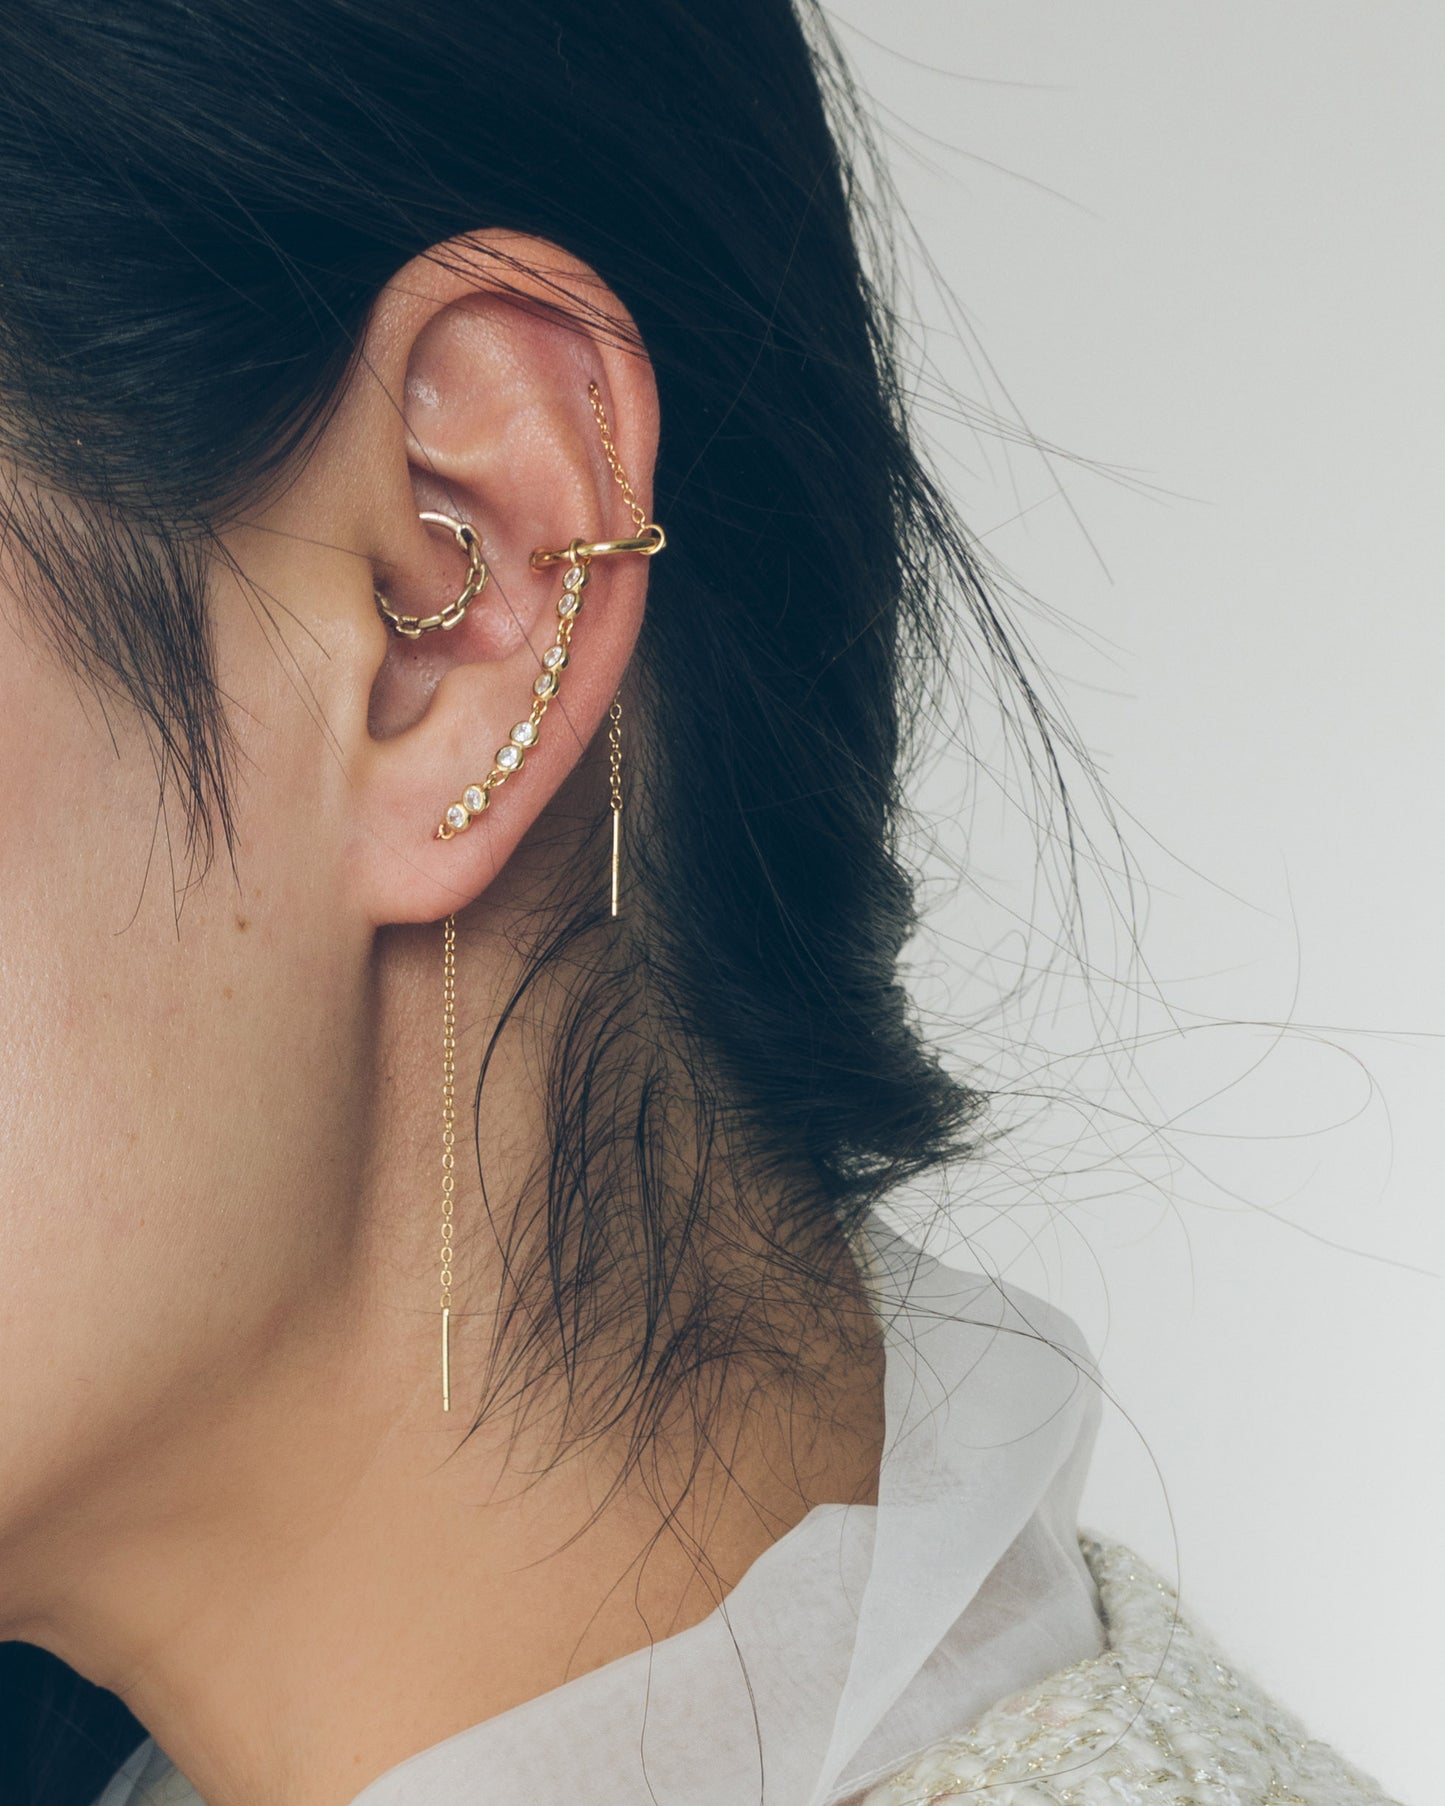 Ear Cuff with Two-Chain Threaders